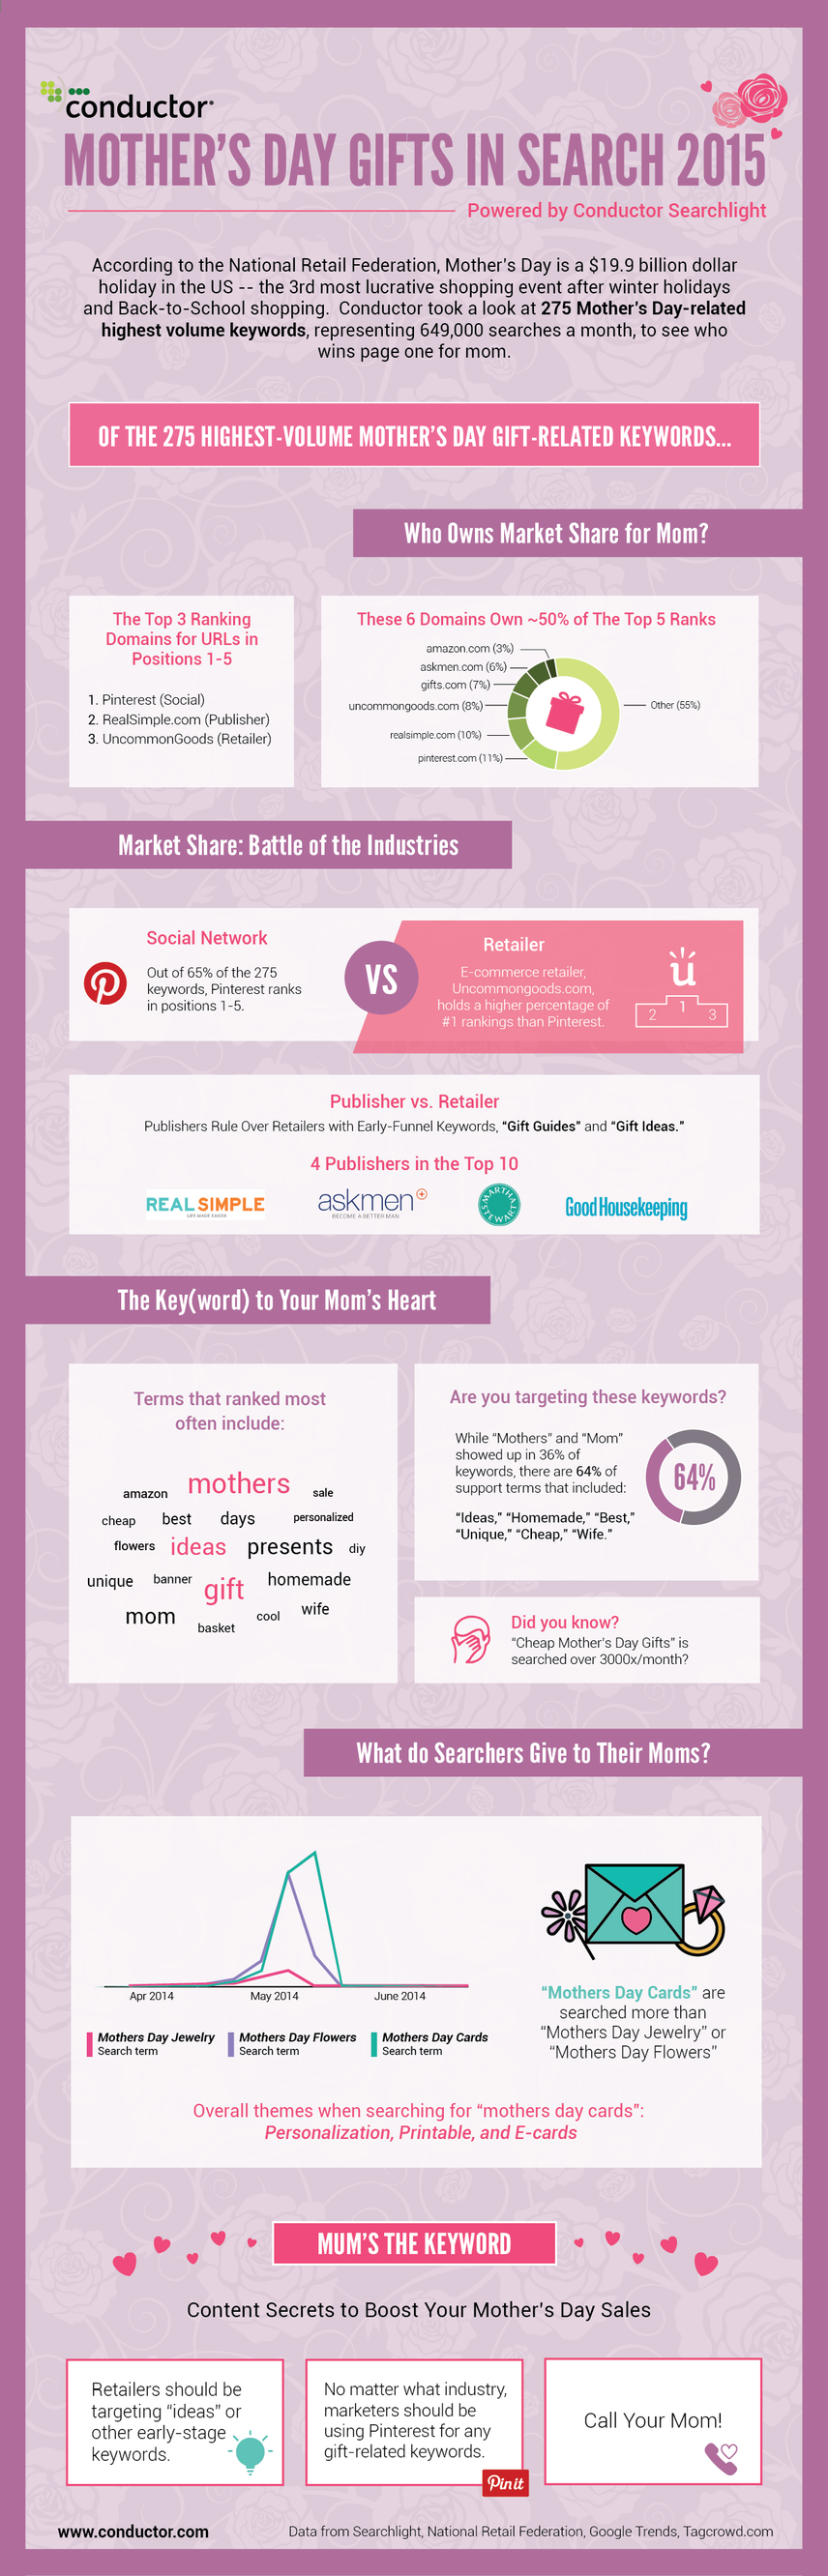 mothers-day-seo-infographic-conductor